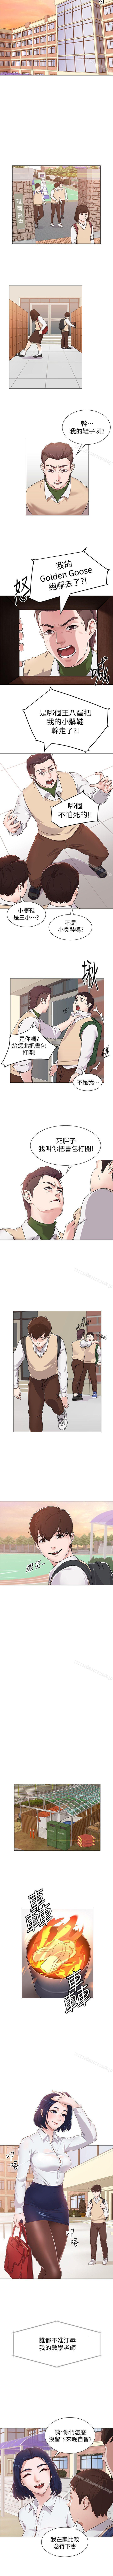 Couples 墮落教師 1-97 Vietnamese - Page 4